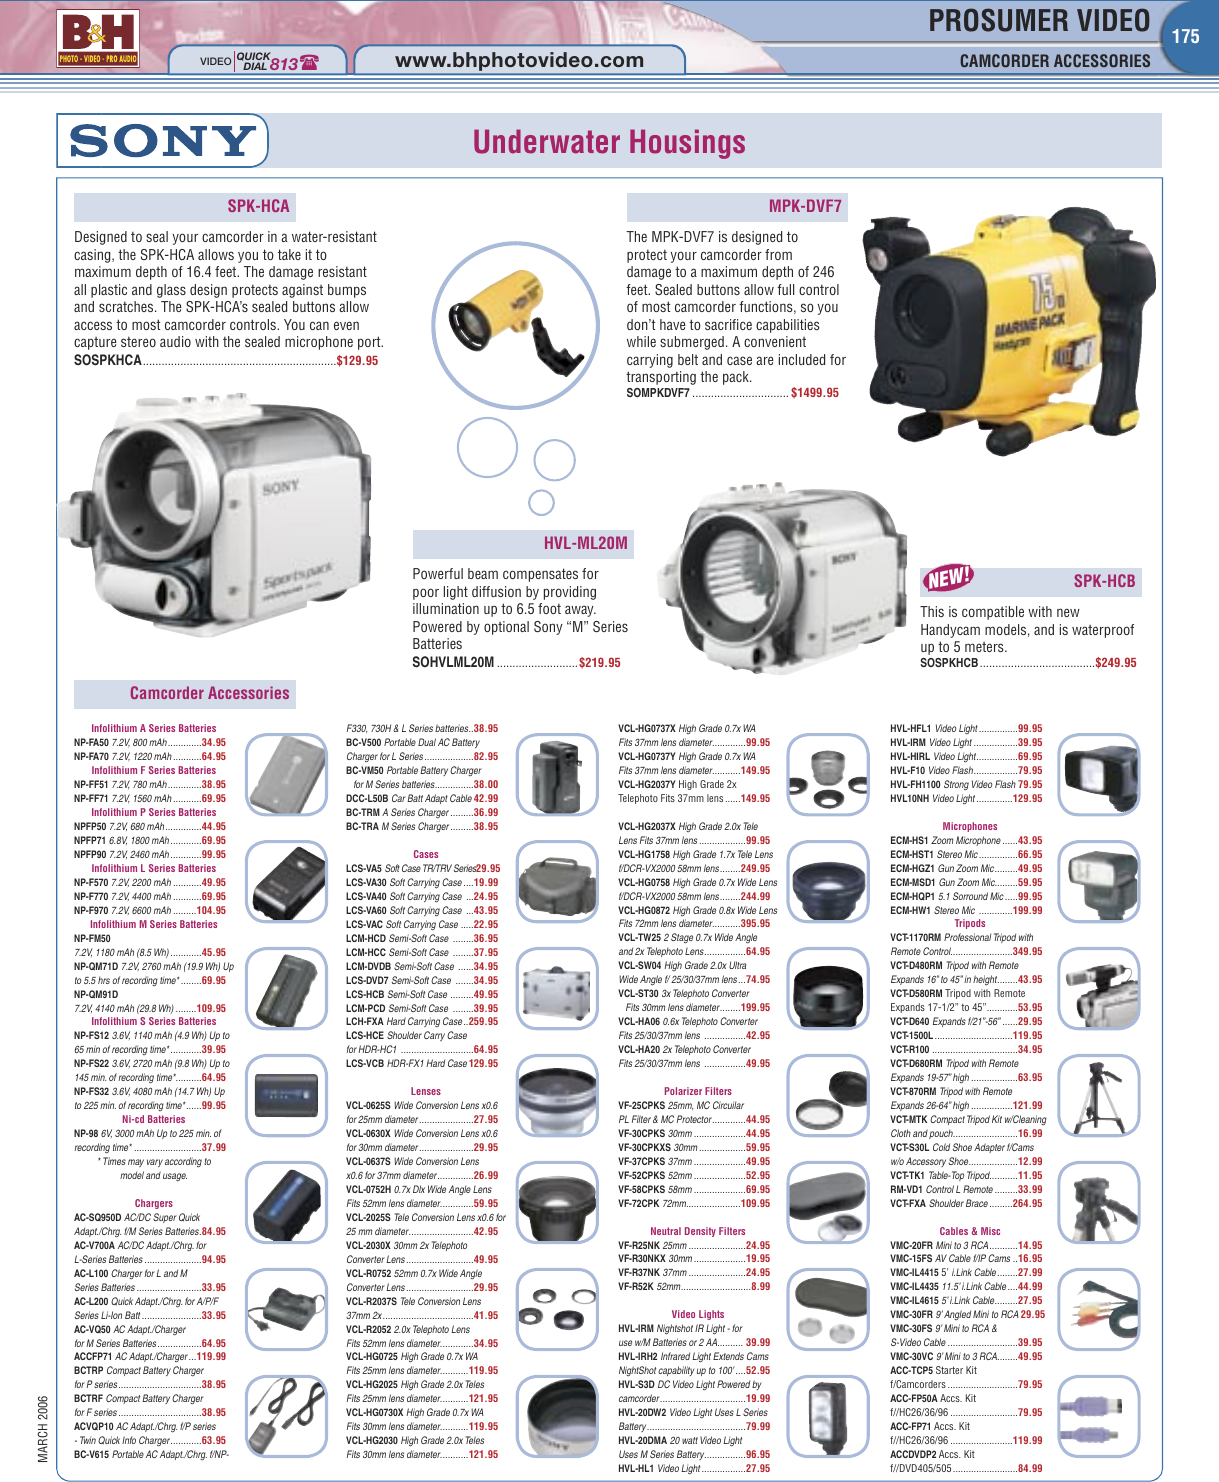 Page 4 of 12 - Canon Canon-Elura-100-Users-Manual- 172-183 ProsumerVideo 03-06  Canon-elura-100-users-manual